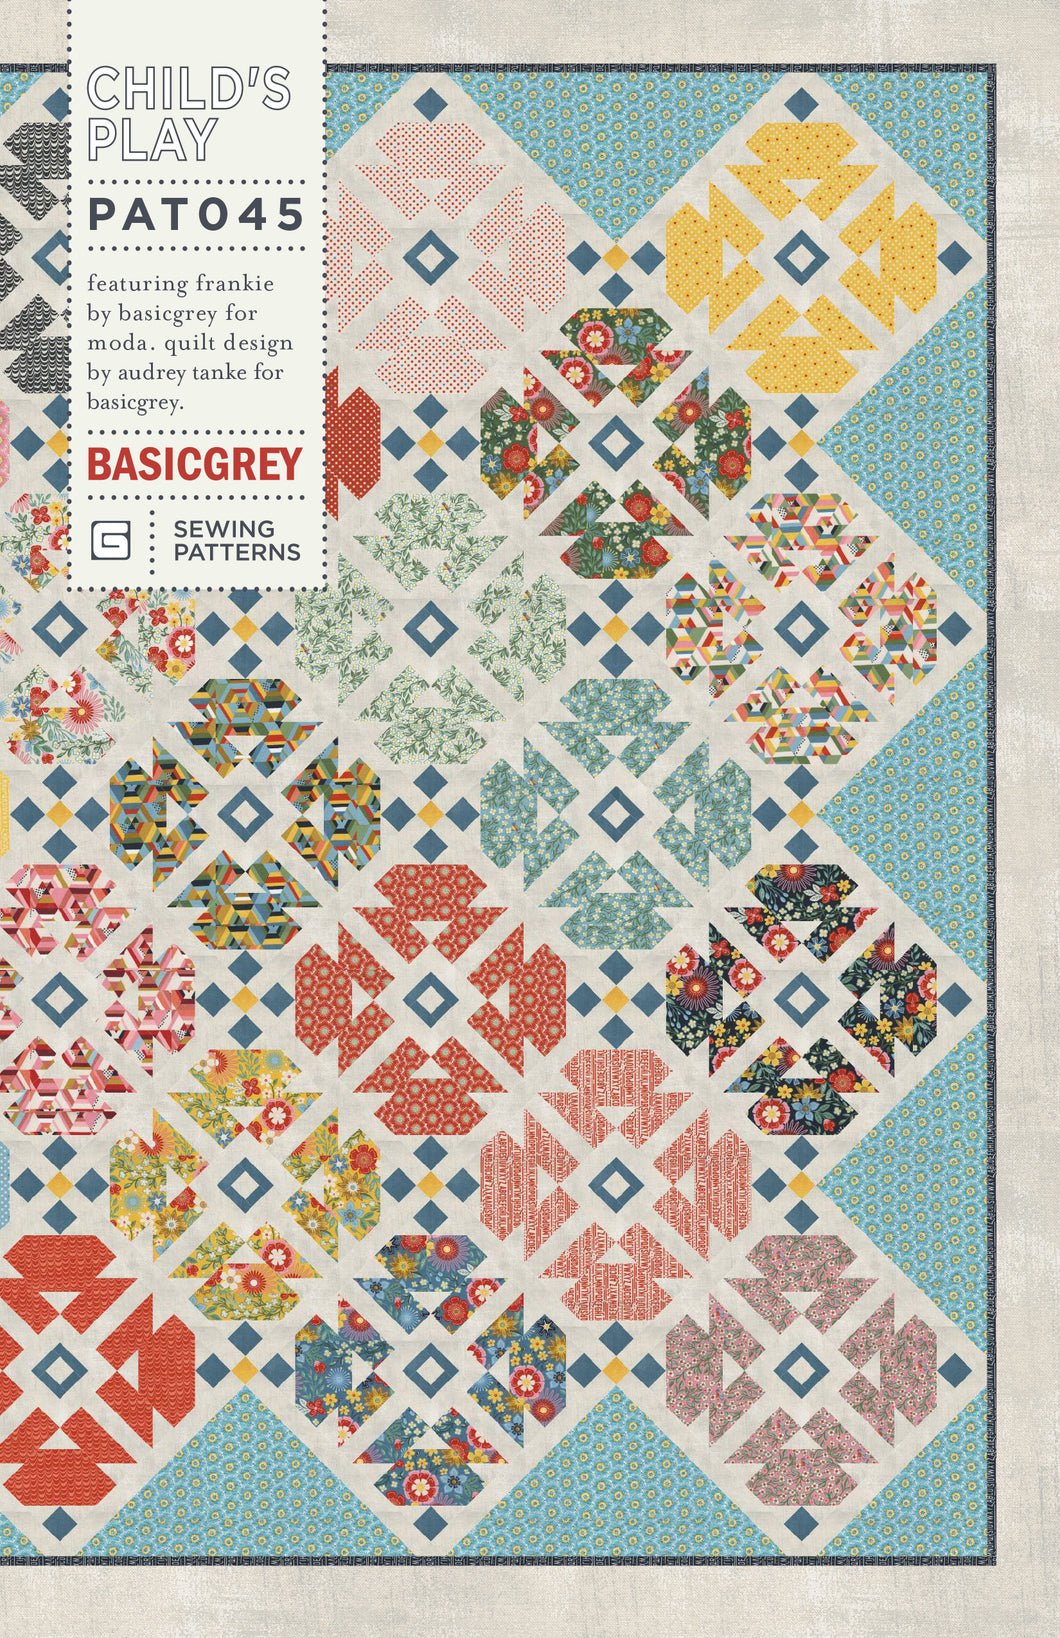 Child's Play fat eighth quilt by Audrey Tanke for BasicGrey. Fabric is Frankie by BasicGrey for Moda Fabrics